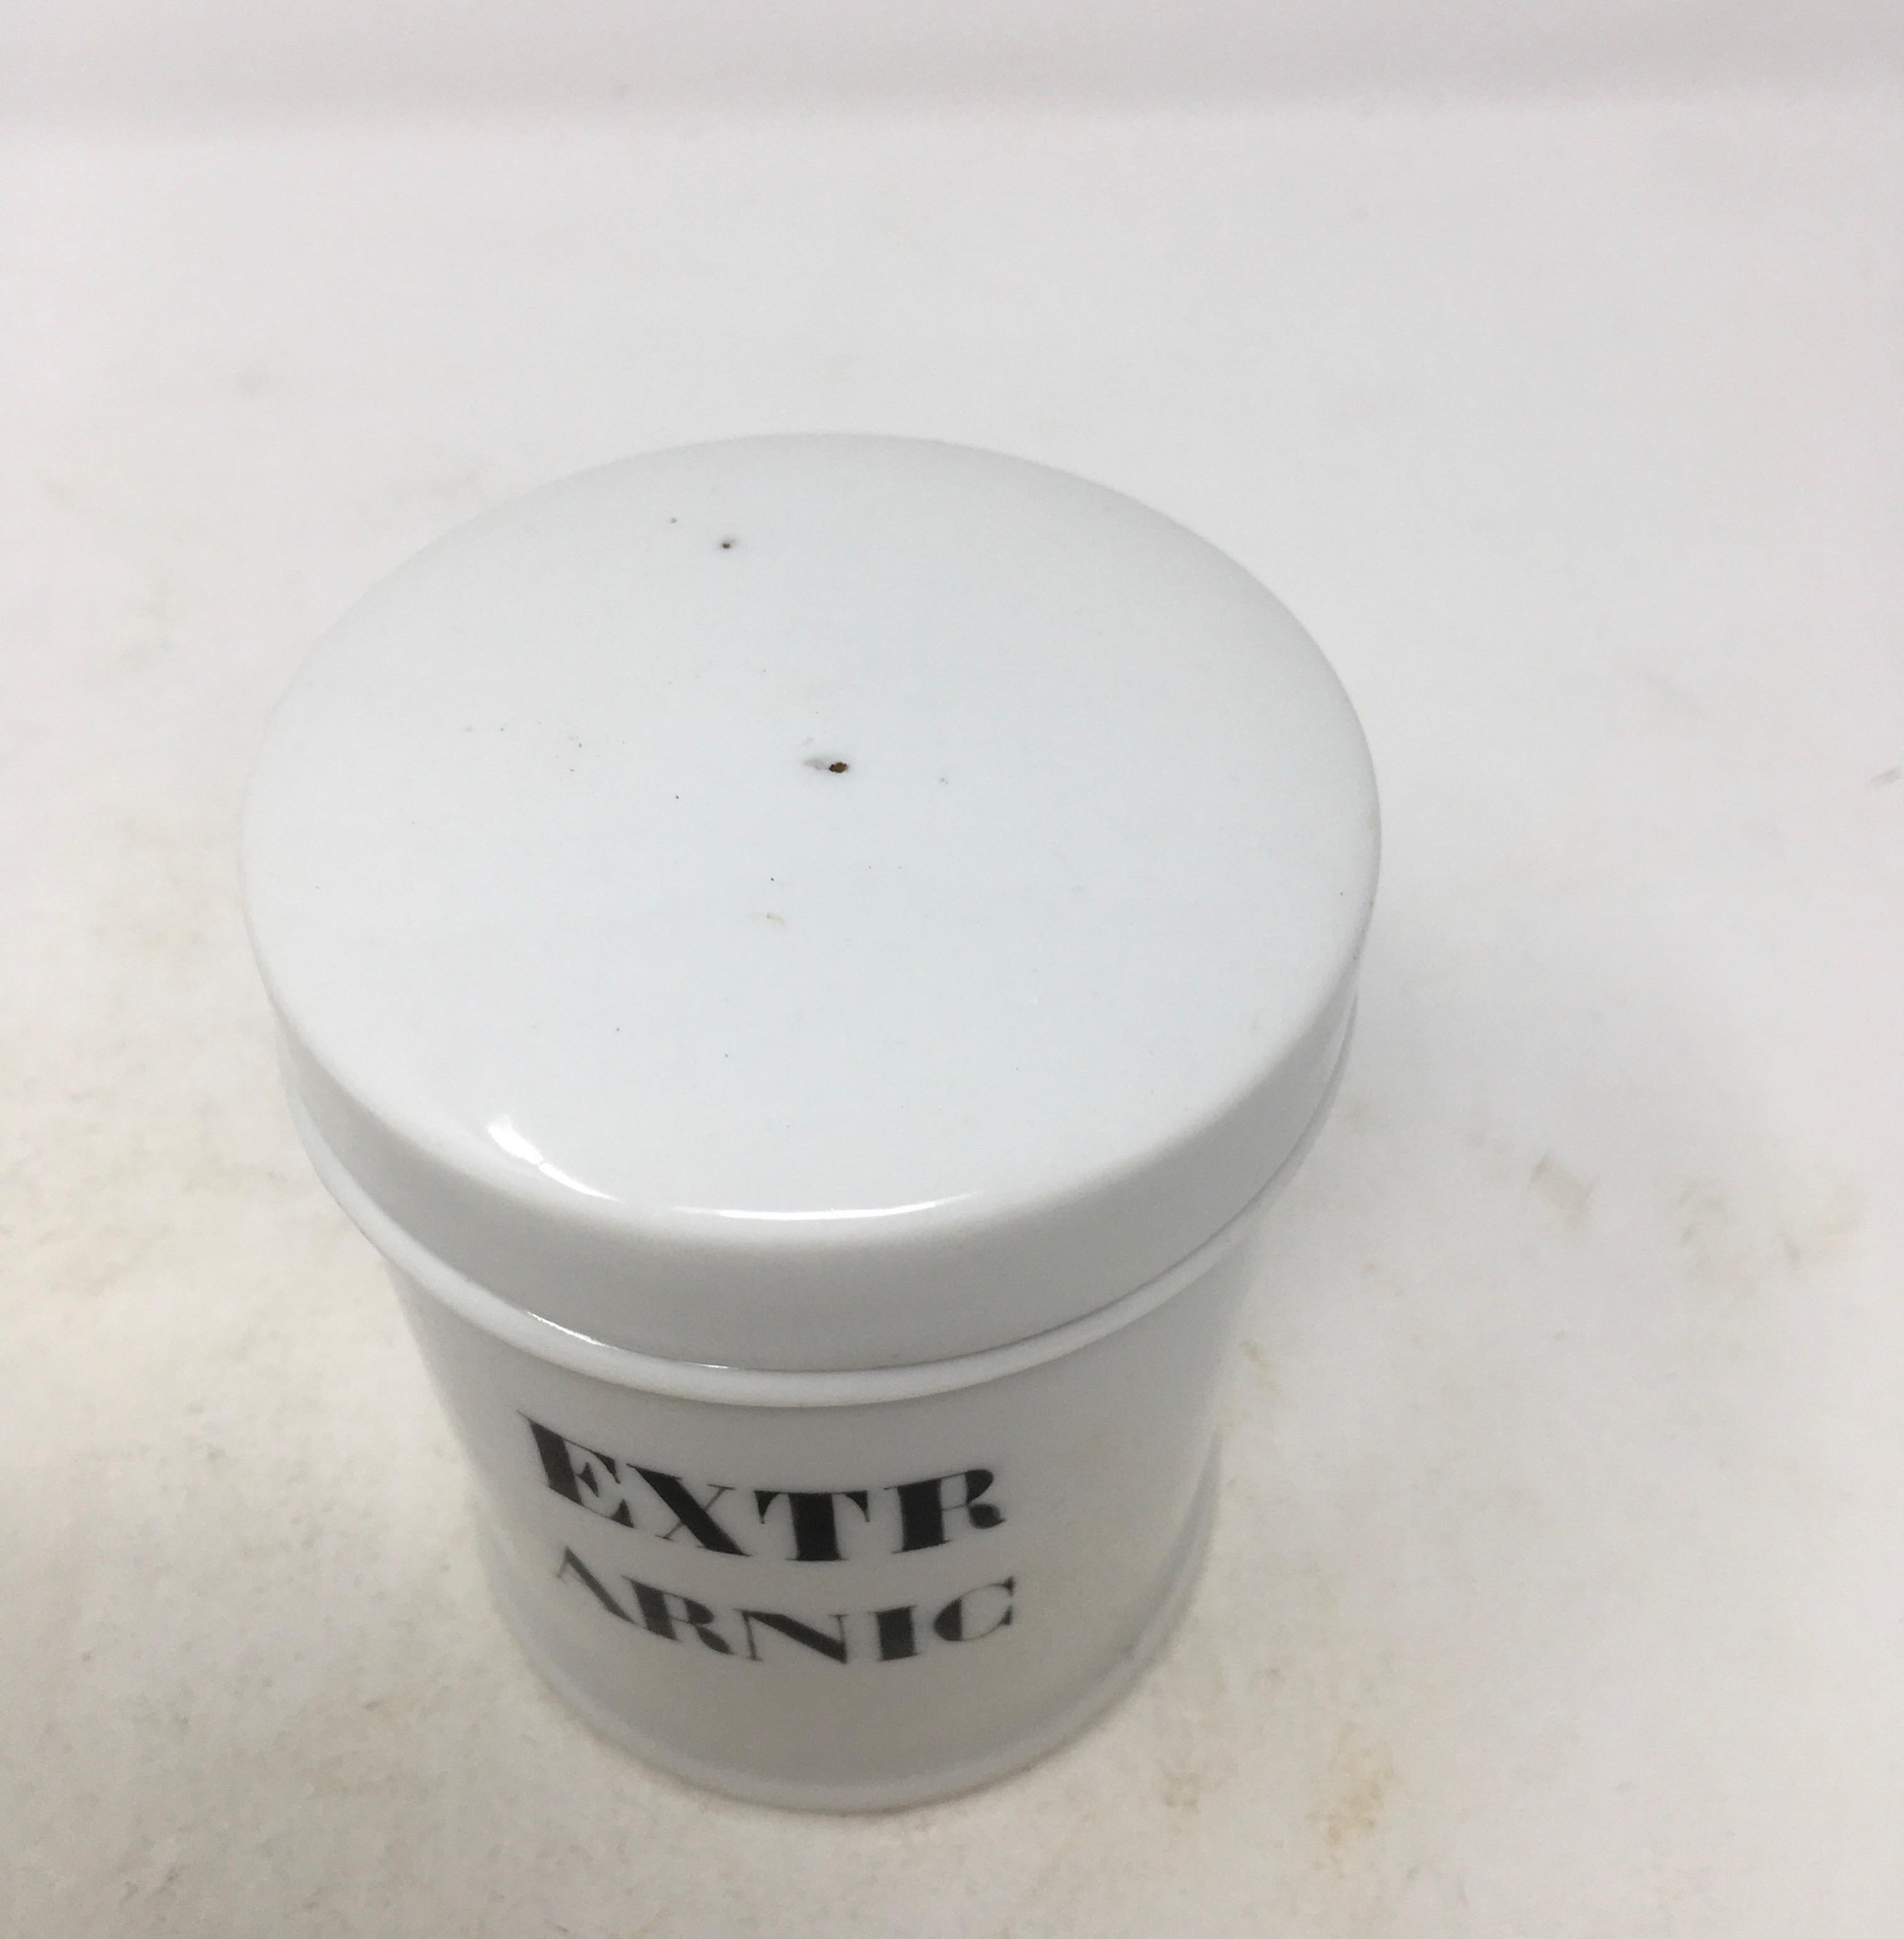 This is a porcelain apothecary jar, from the early 20th century, found in France. The label reads EXTR ARNIC. A great kitchen piece.


This piece weighs 1 lb.